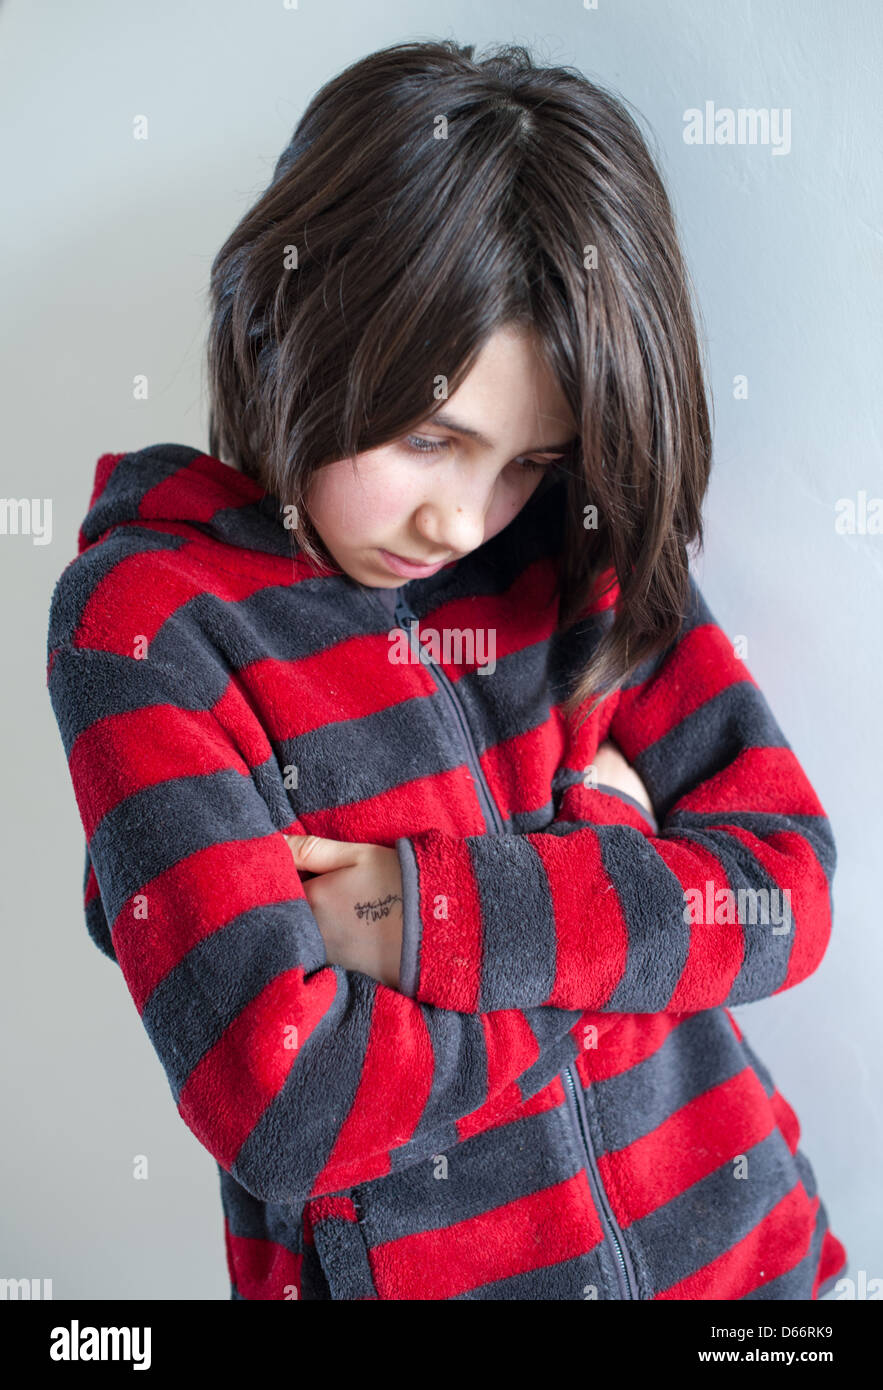 Young white dark-haired girl looking sad, angry, vulnerable and upset, looking at the camera and away from camera wearing a red and grey sweatshirt Stock Photo